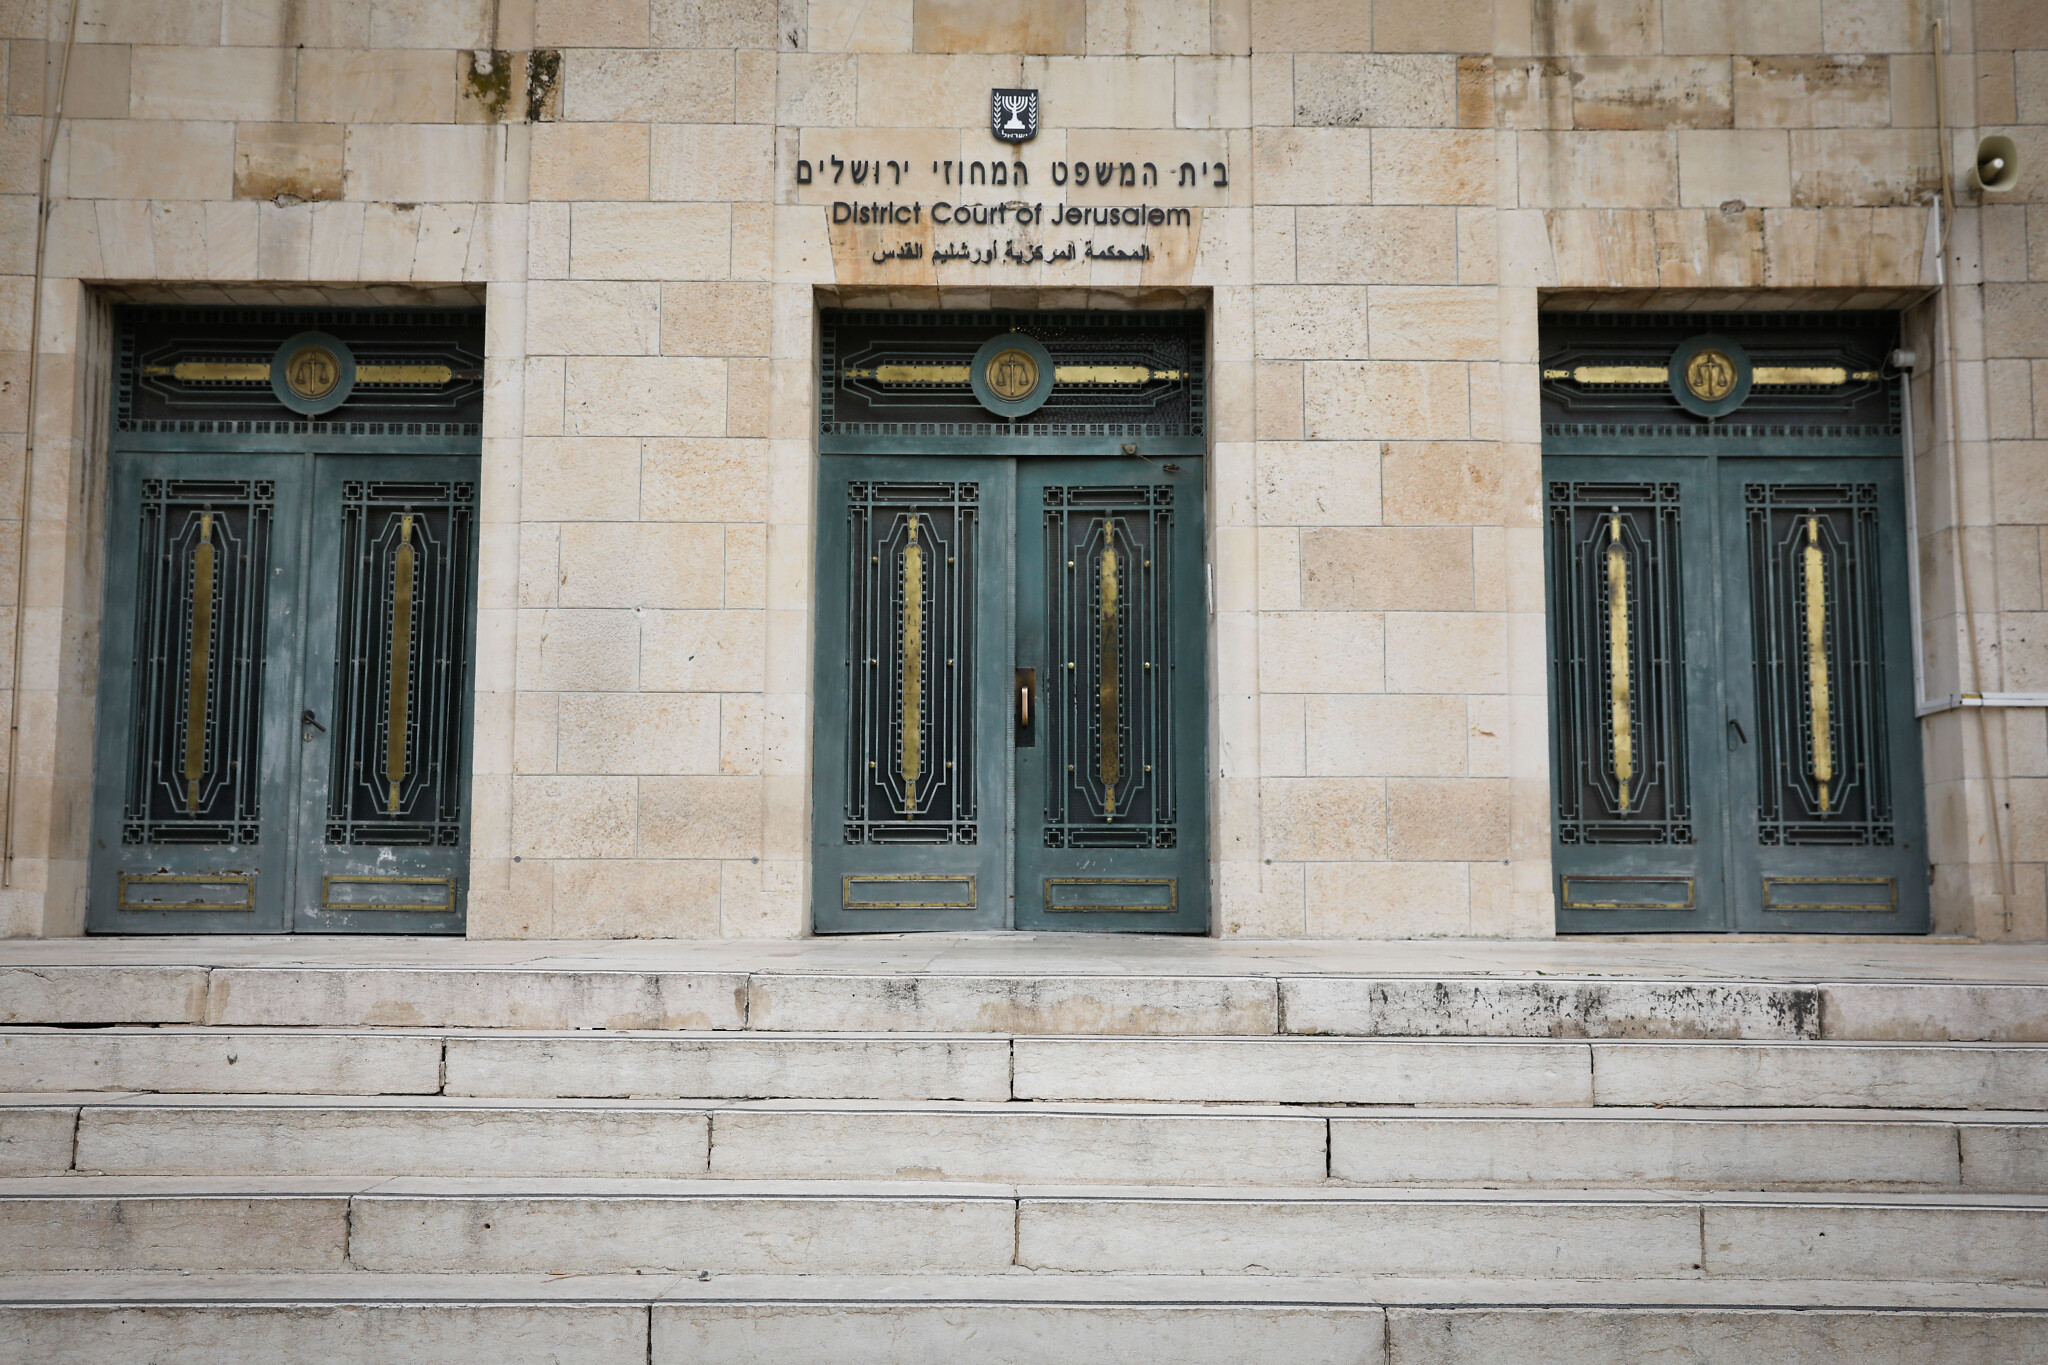 View of the Jerusalem District Court on January 28, 2020. Photo by Olivier Fitoussi/Flash90 *** Local Caption *** בית משפט
בניין
ירושלים
מחוזי
מבט